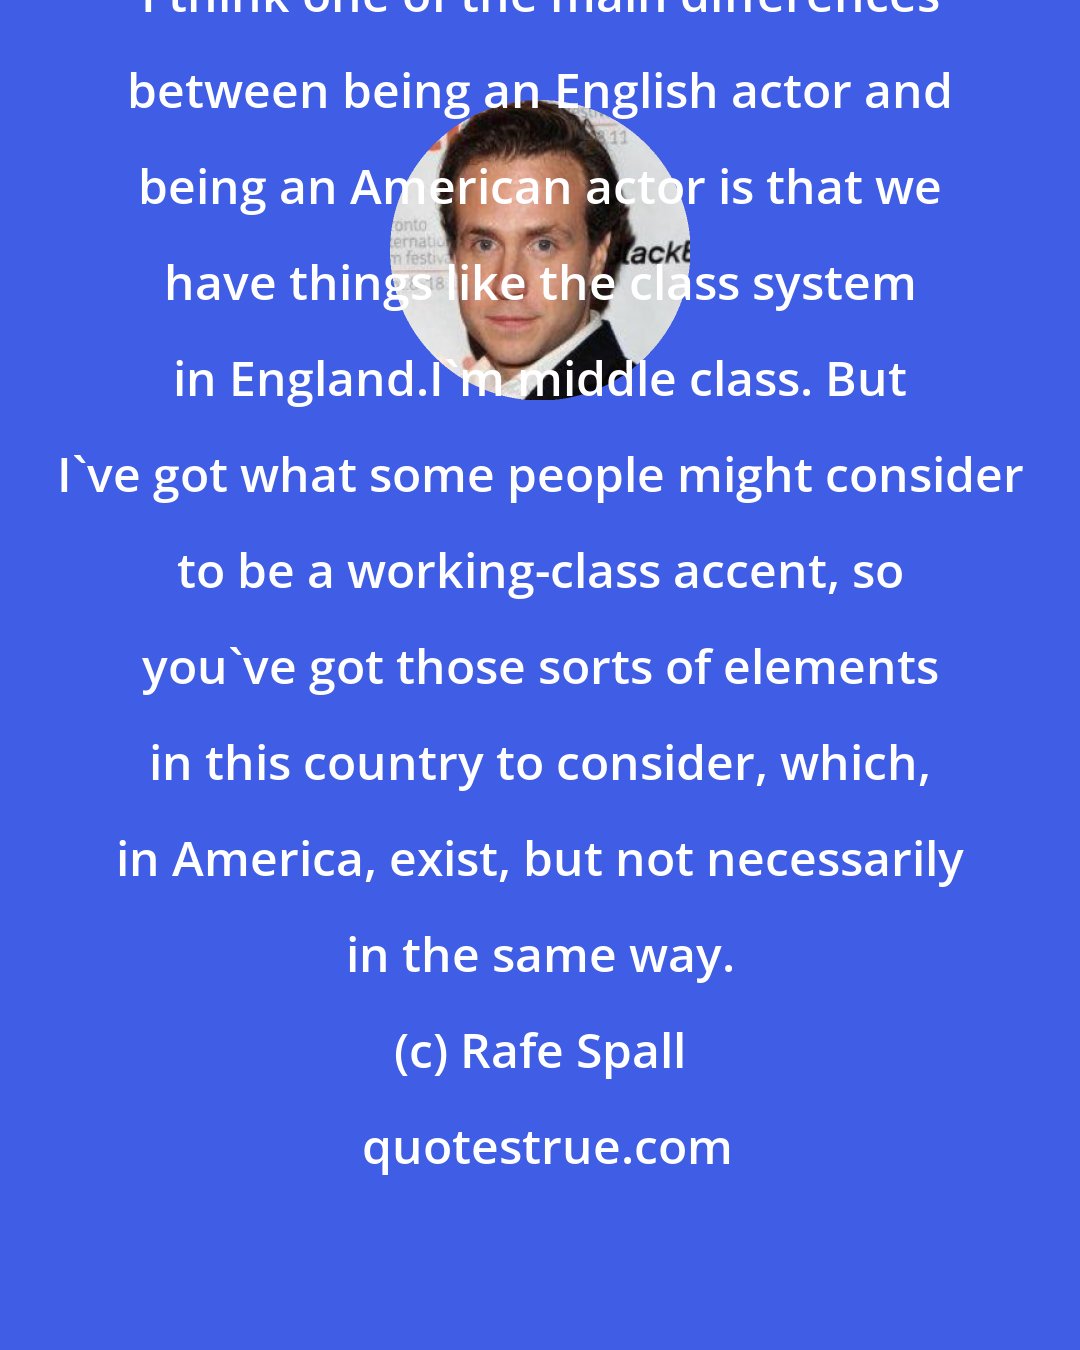 Rafe Spall: I think one of the main differences between being an English actor and being an American actor is that we have things like the class system in England.I'm middle class. But I've got what some people might consider to be a working-class accent, so you've got those sorts of elements in this country to consider, which, in America, exist, but not necessarily in the same way.